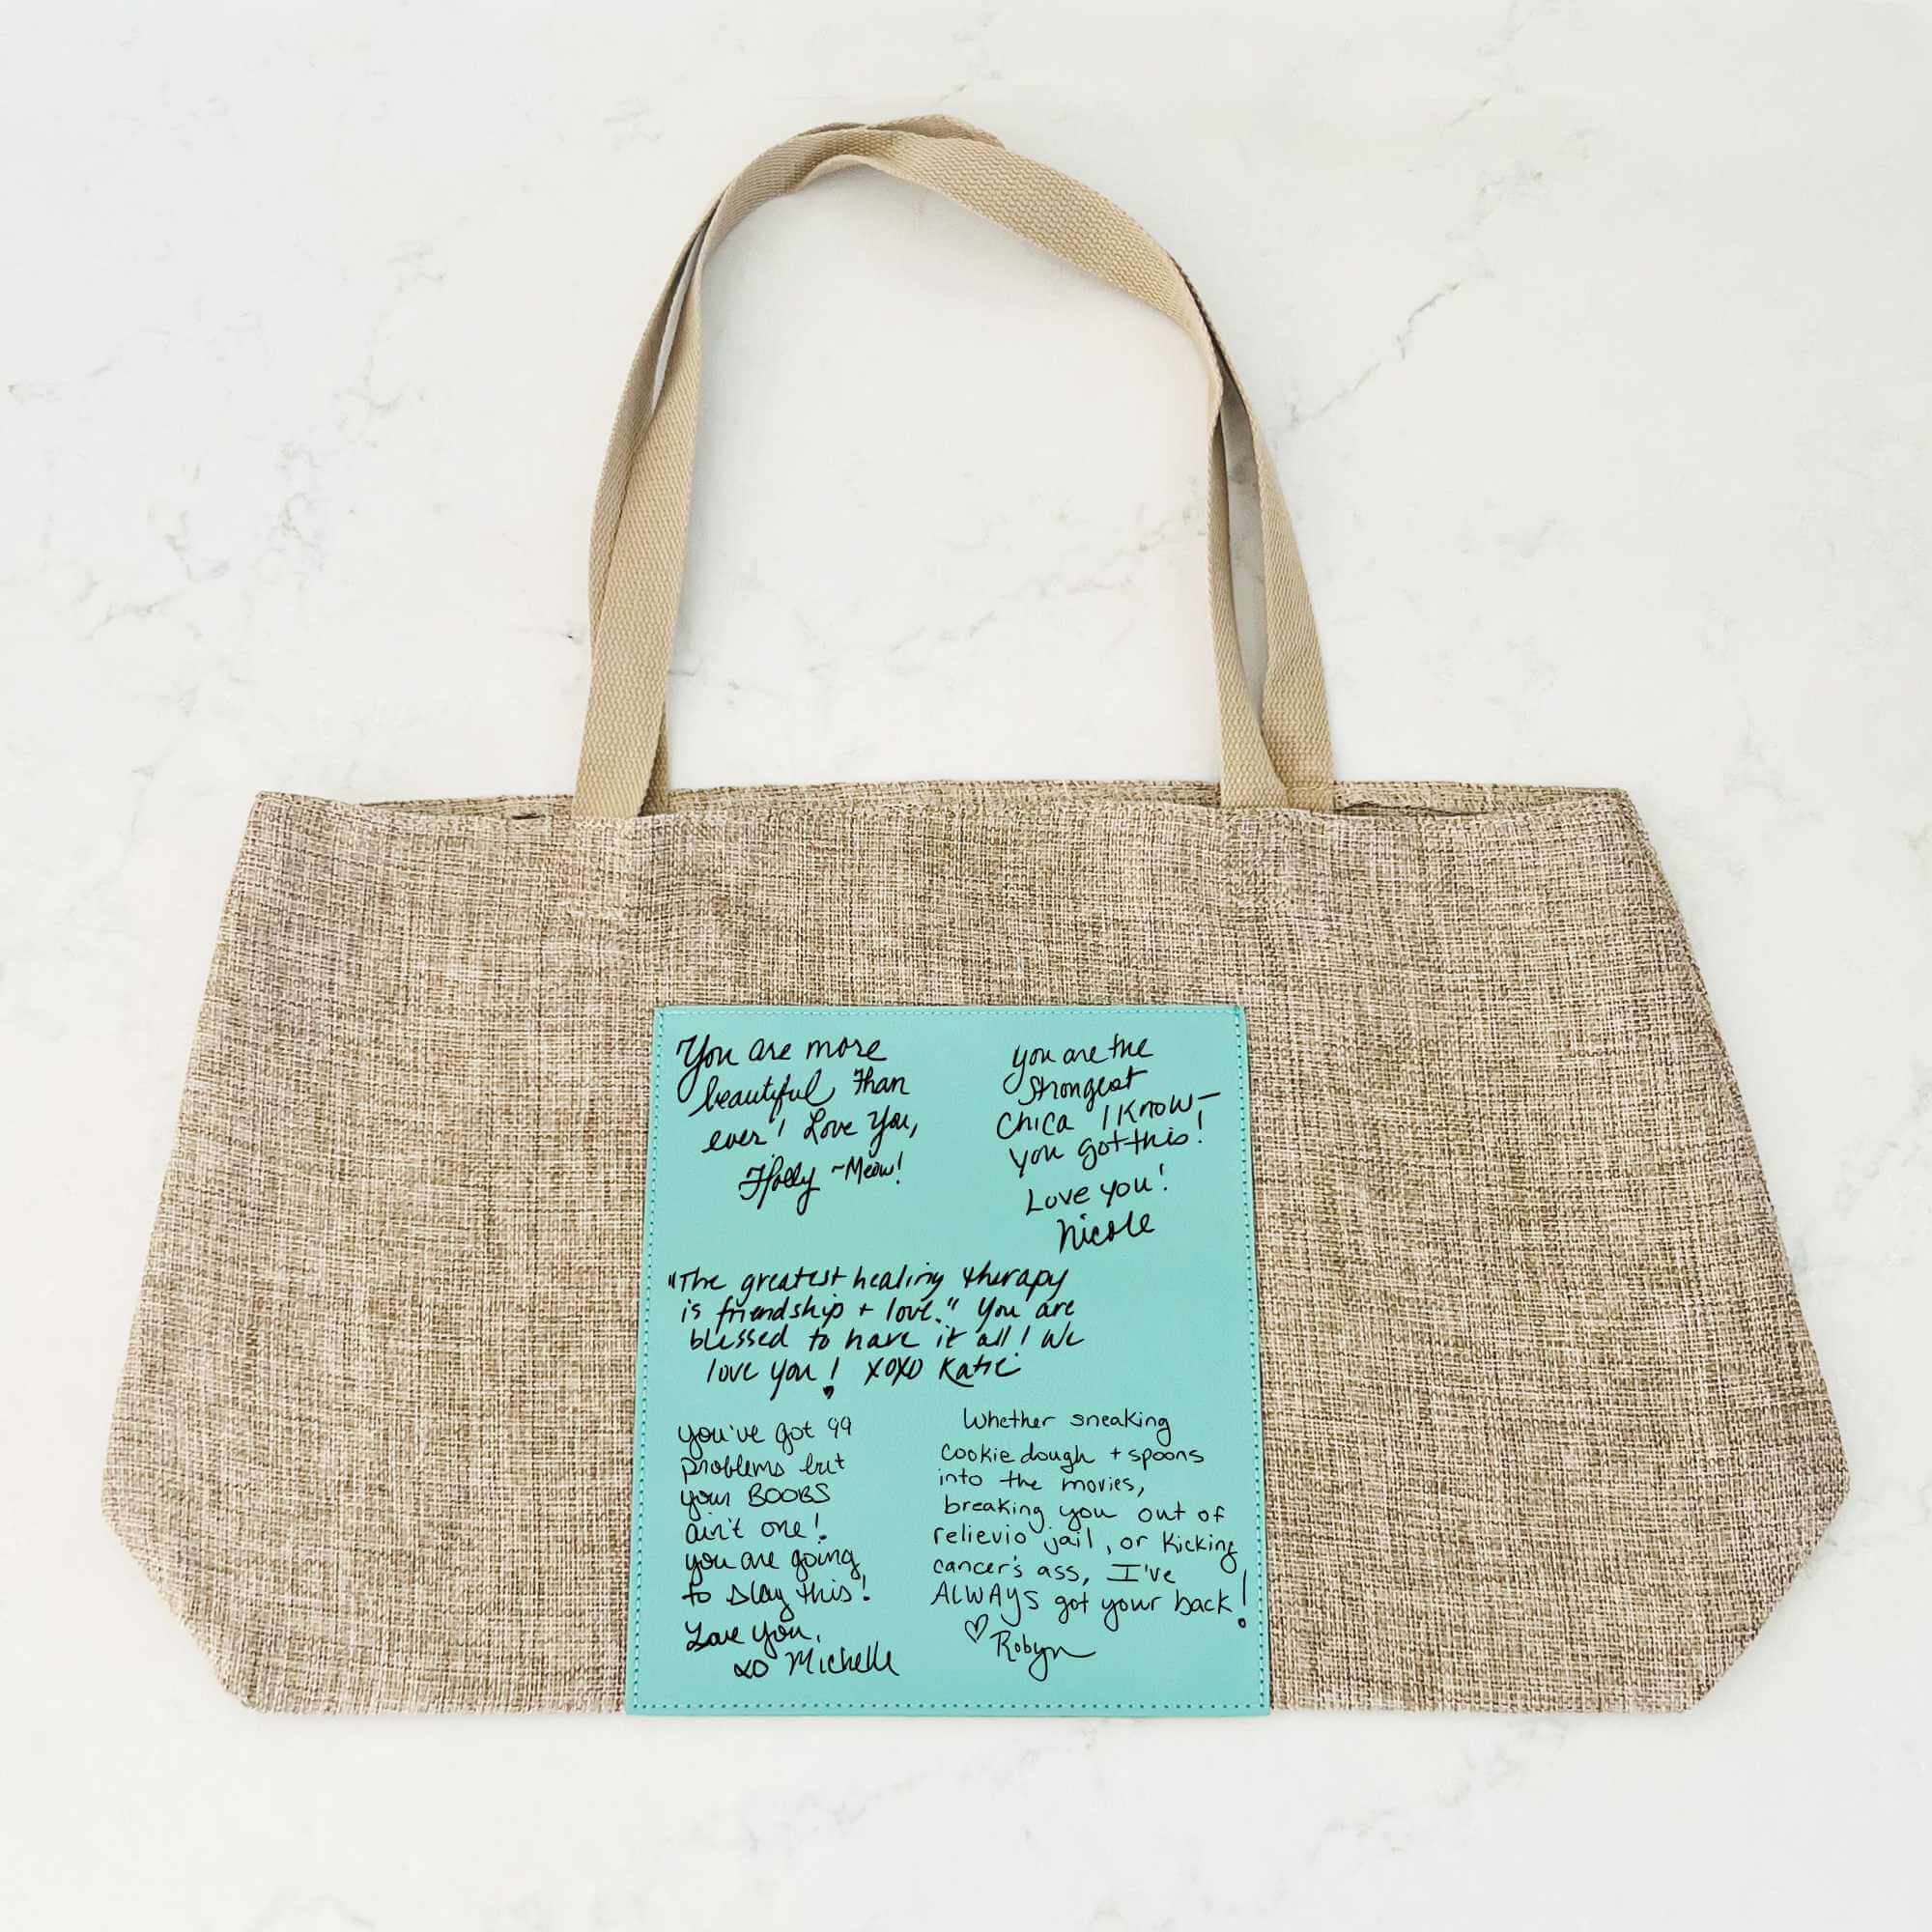 DELUXE Burlap Tote Bag Personalized with Handwritten Messages